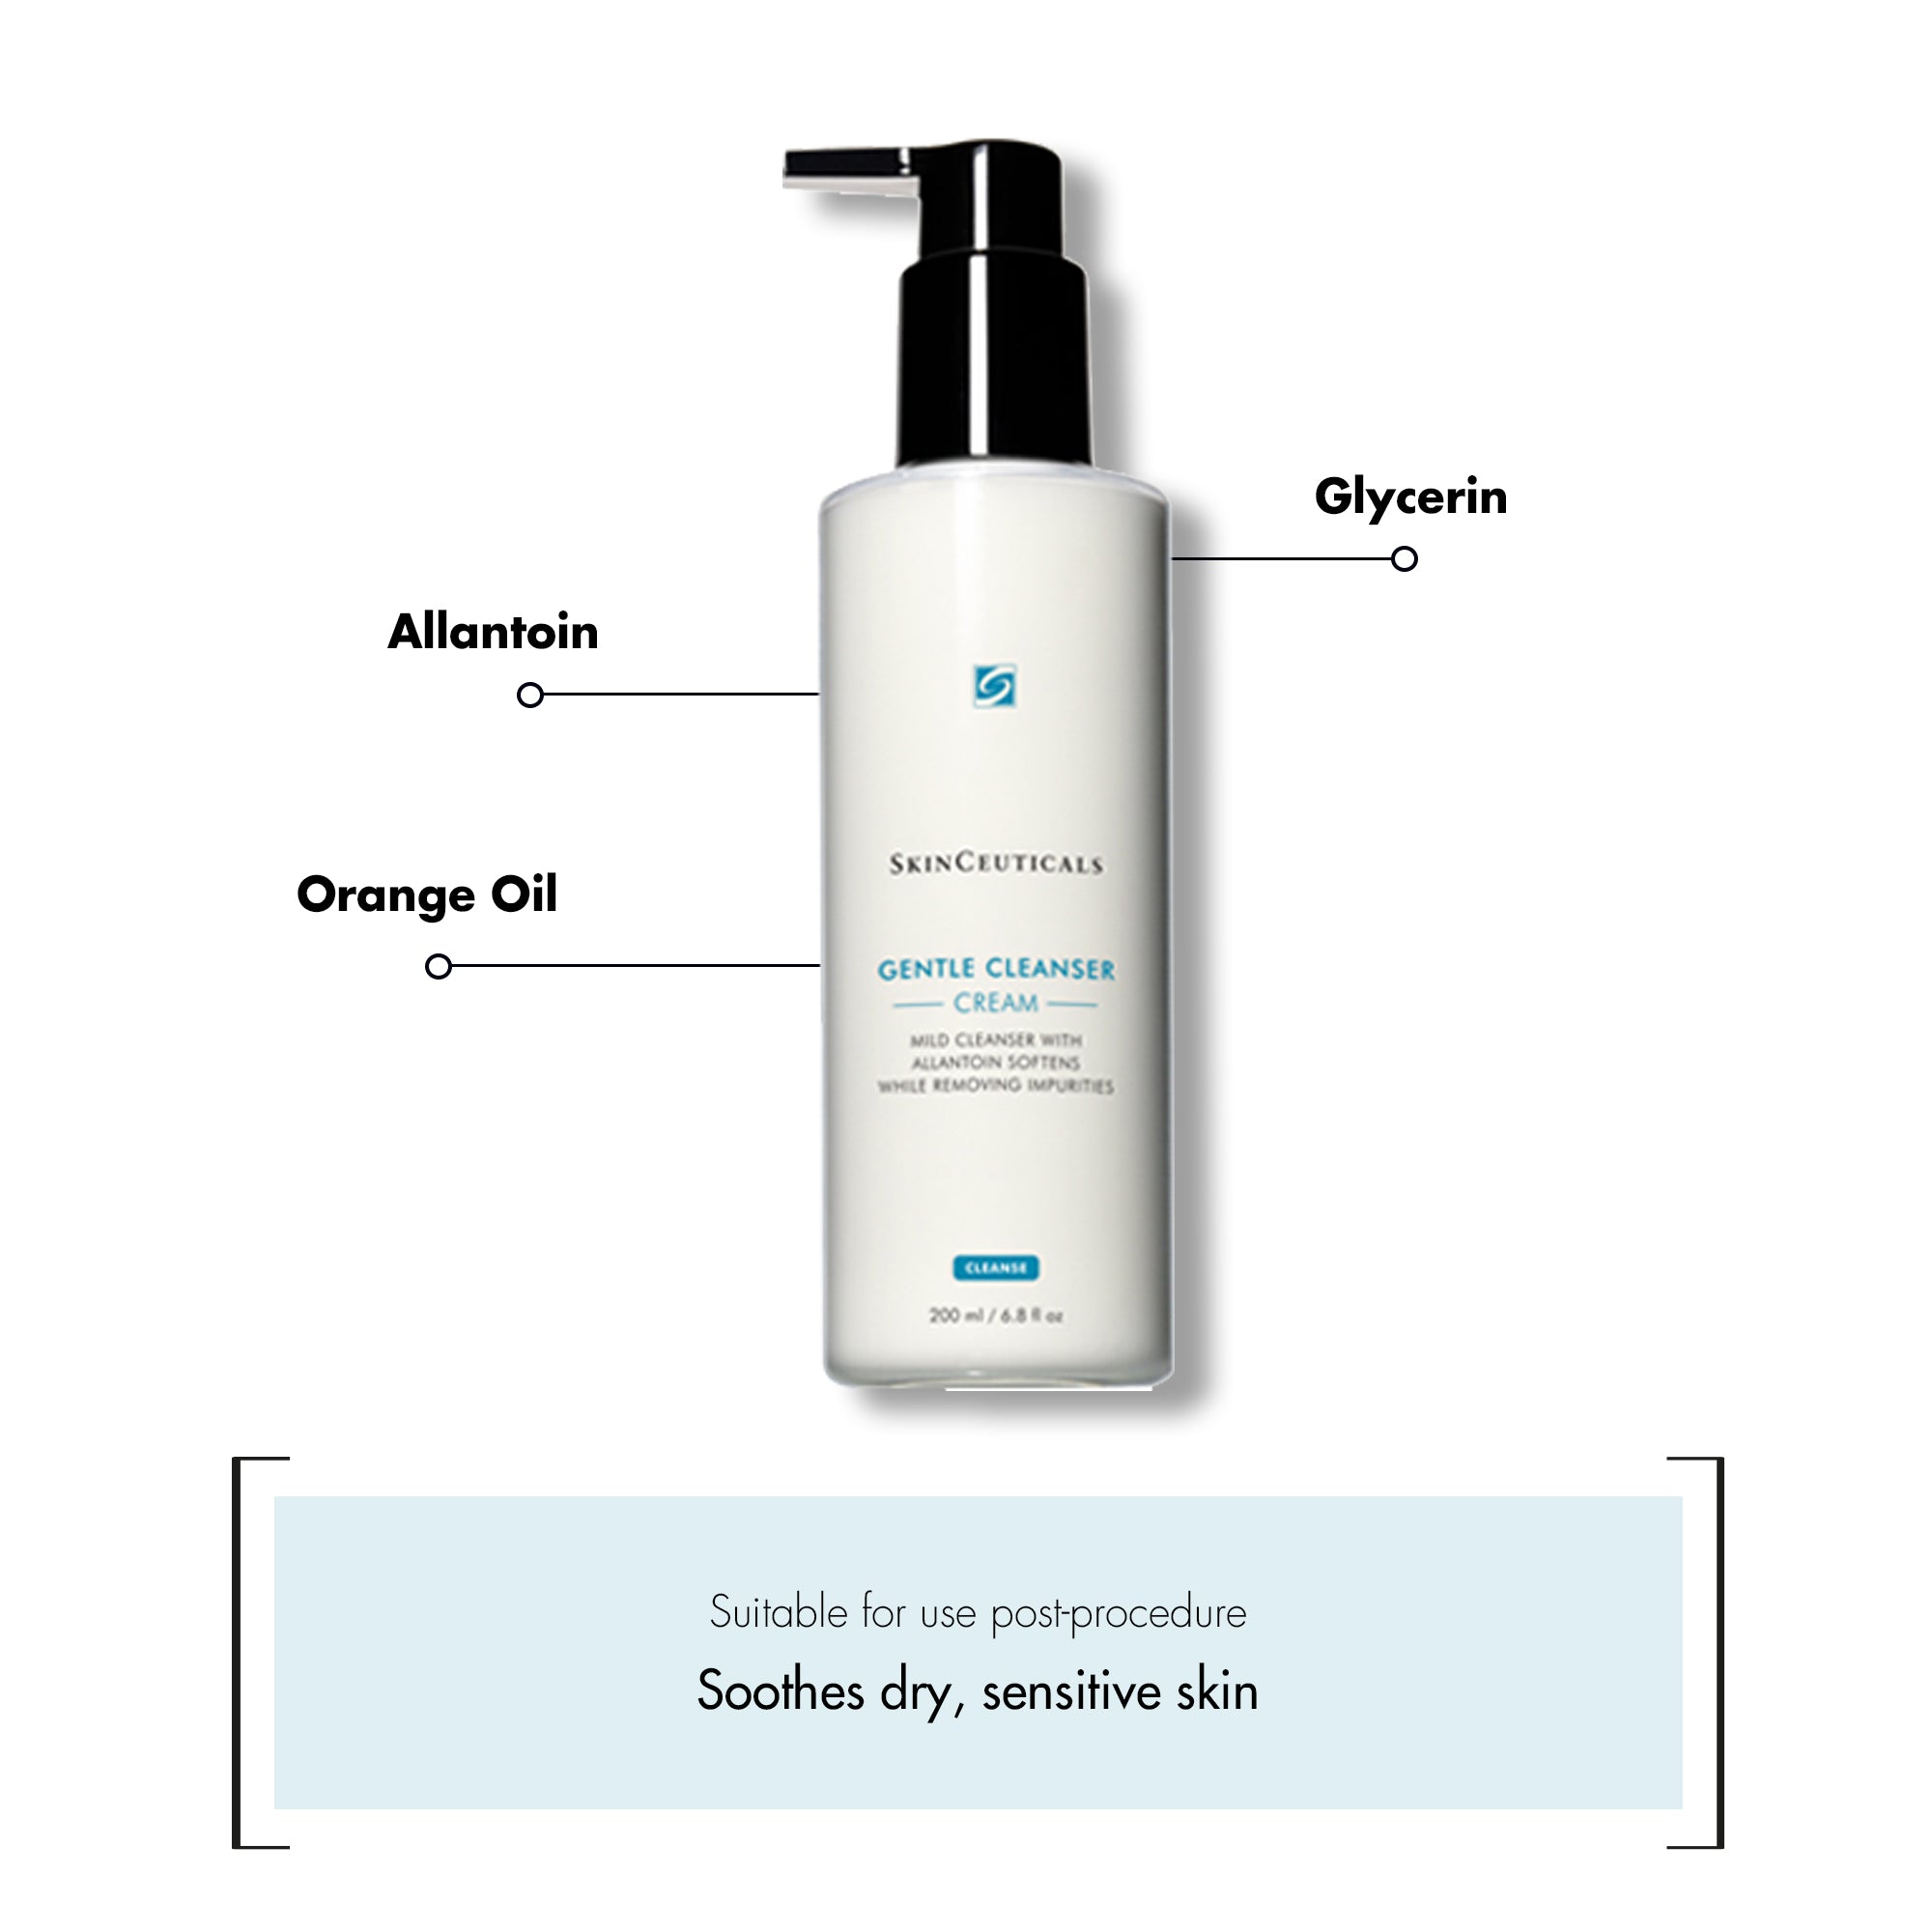 SKINCEUTICALS Gentle Cleanser 200ml: Cleanse and refresh your skin with SKINCEUTICALS Gentle Cleanser, a mild and non-irritating formula that effectively removes impurities, makeup, and excess oil without stripping the skin of its natural moisture, leaving it clean, soft, and balanced.